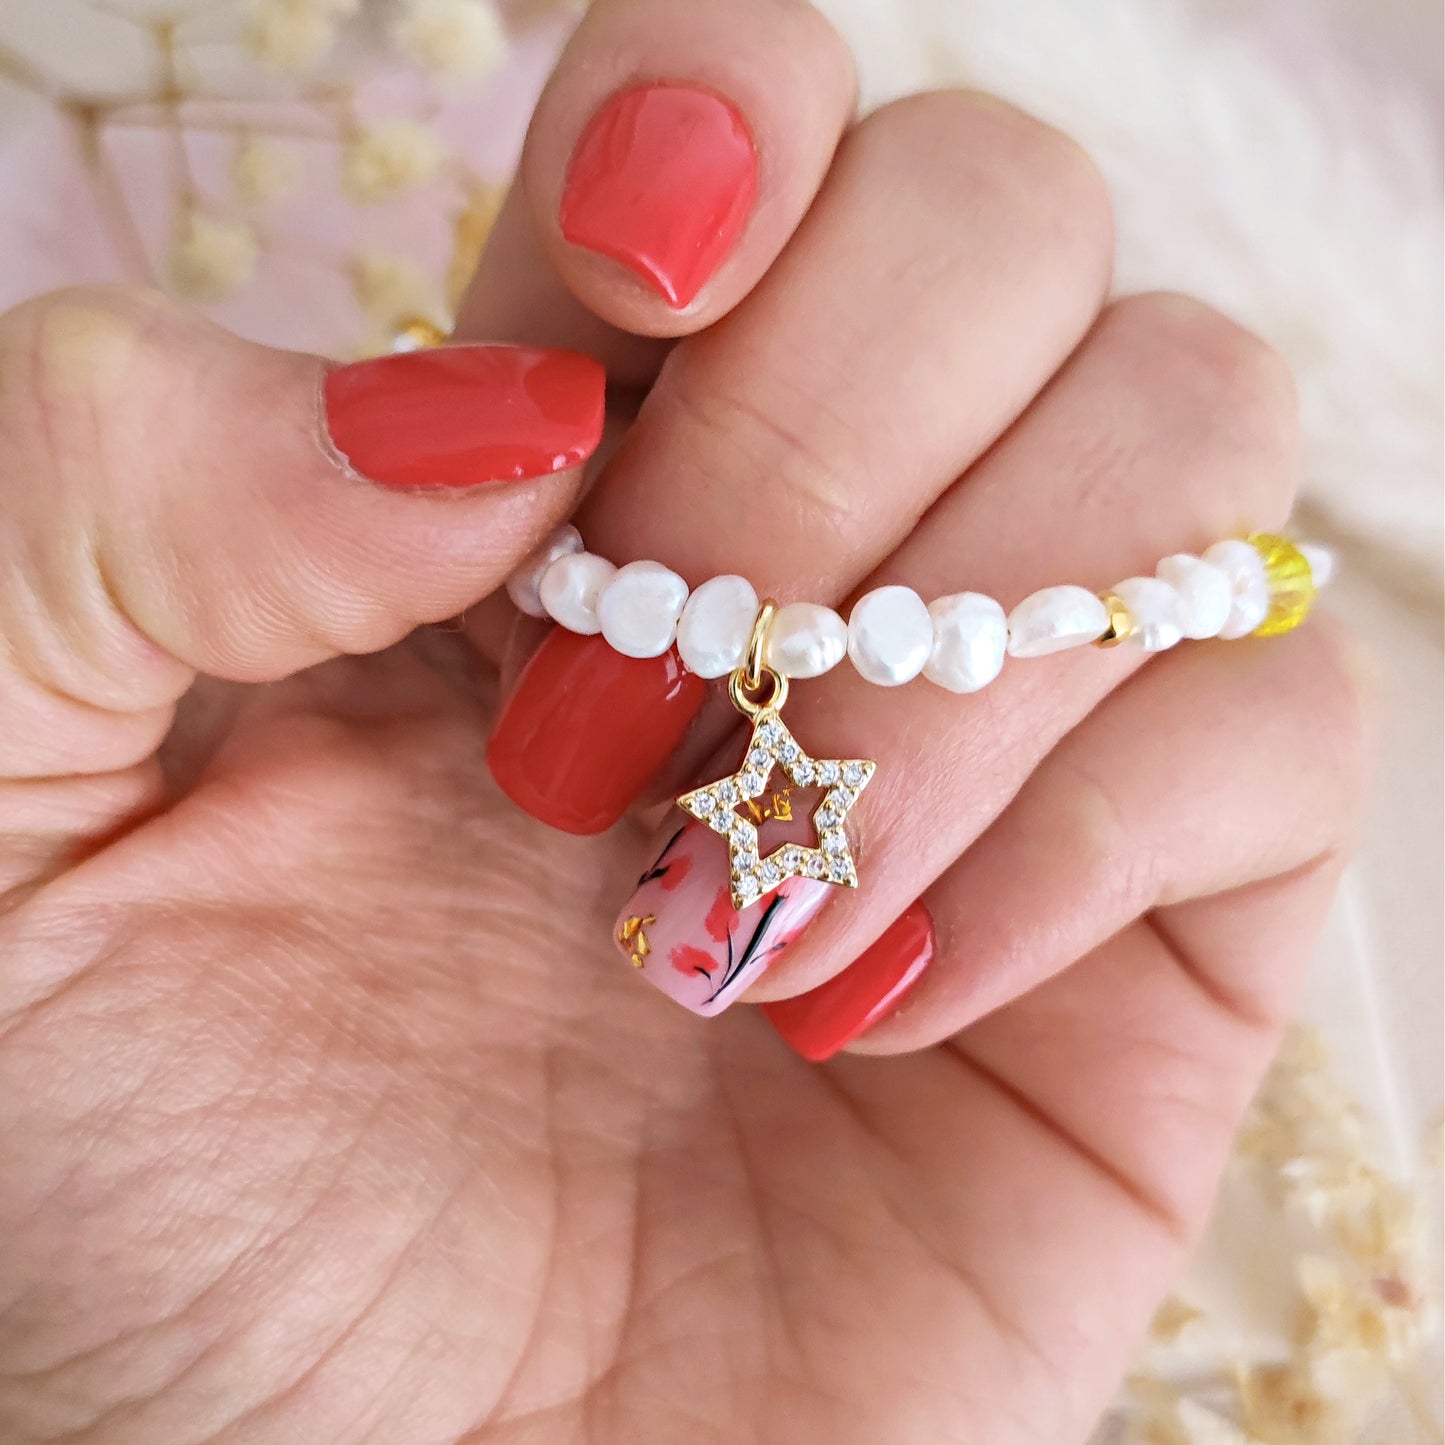 Bracelet with freshwater pearls, yelllow crystals and star // MIGINA